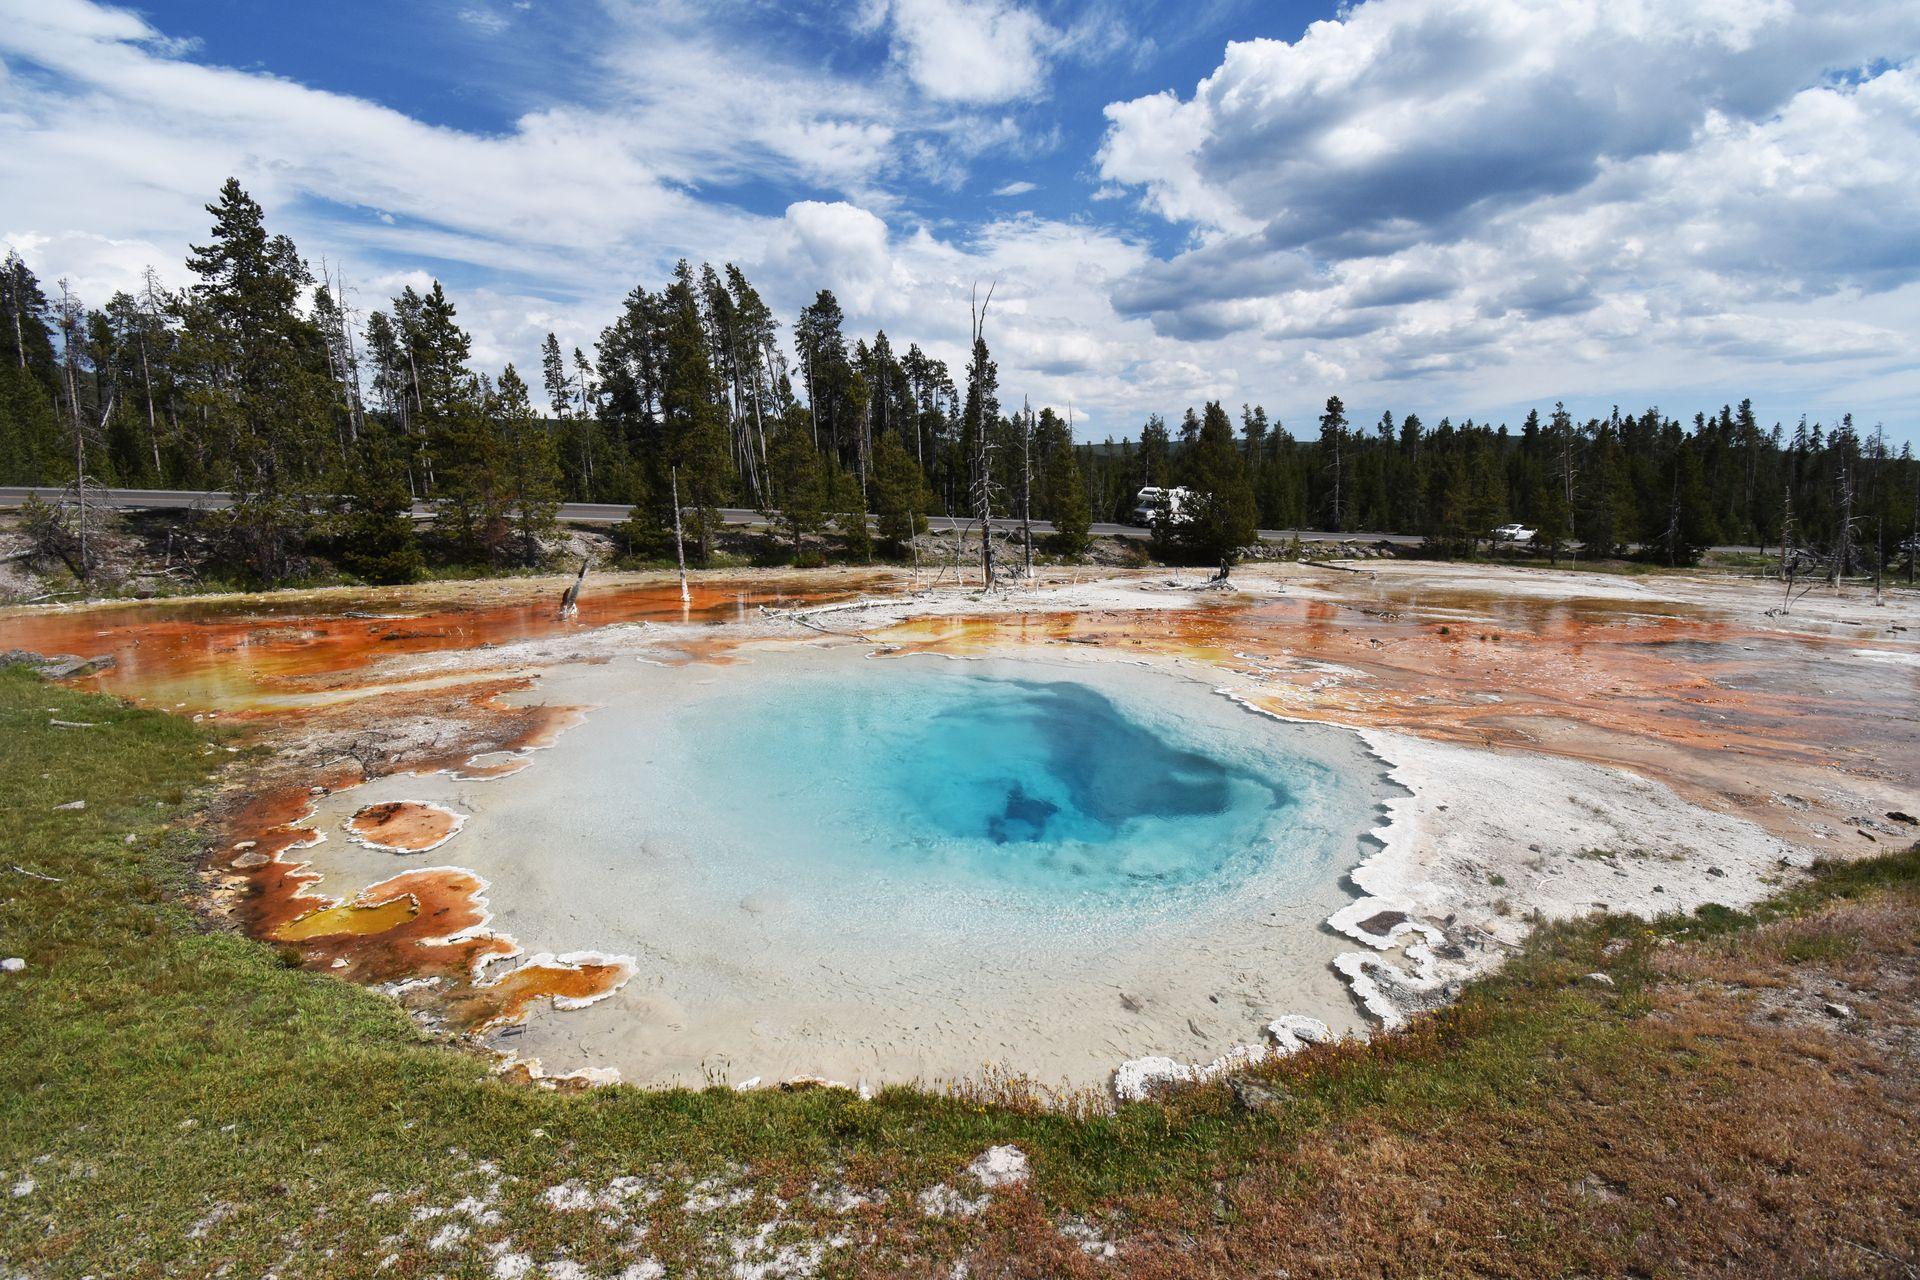 A bright blue spring surrounded by orange colors in the Fountain Paint Pots area of Yellowstone.